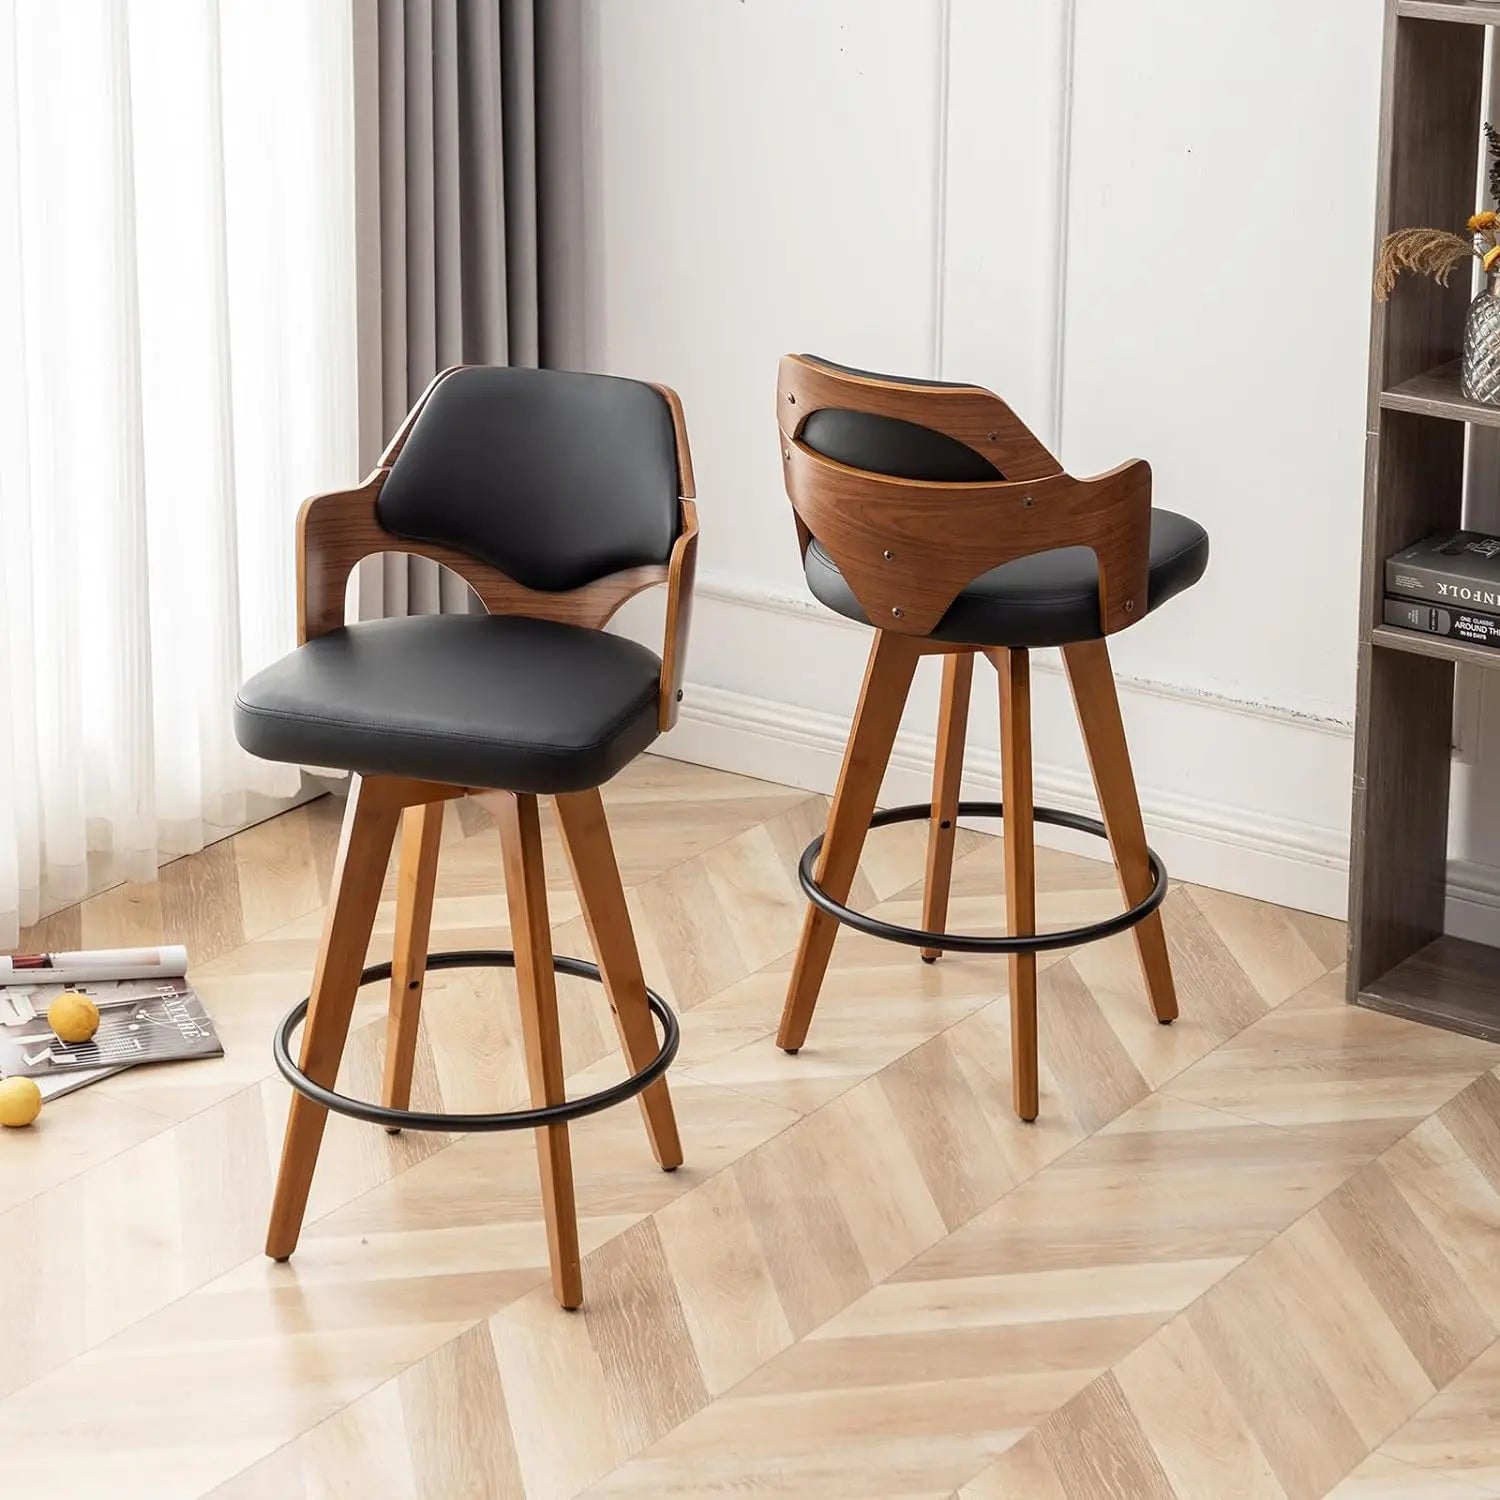 RUO WU Low Back Counter Stools Set of 2 Upholstered Swivel Bar Chairs With Wooden Legs - Farefe